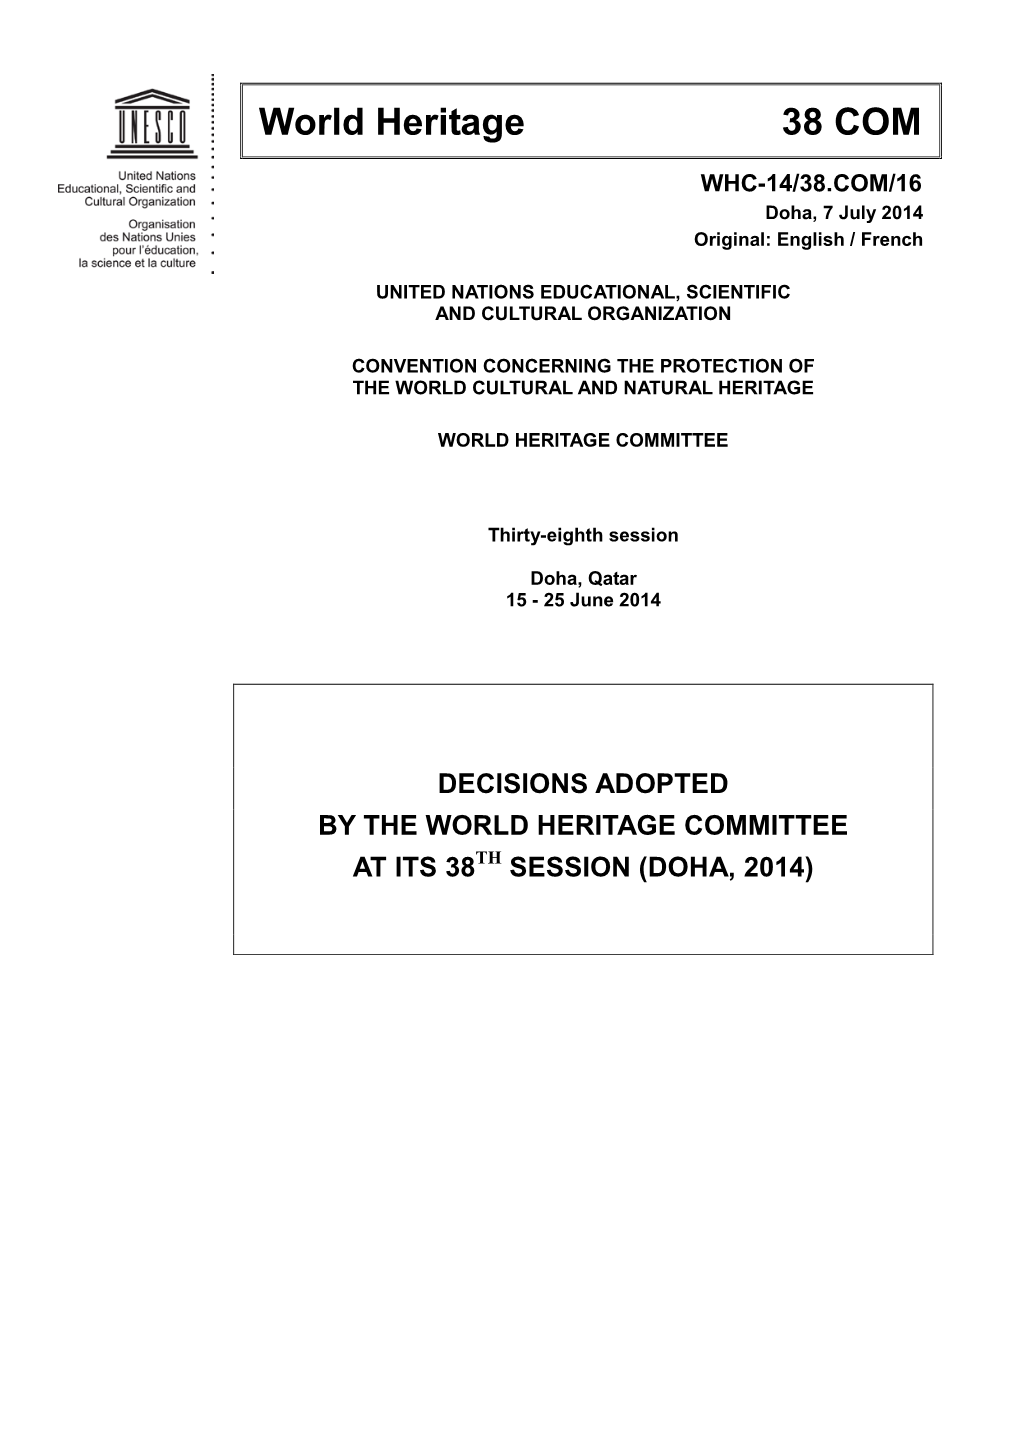 Report of the Decisions Adopted by the World Heritage Committee at Its